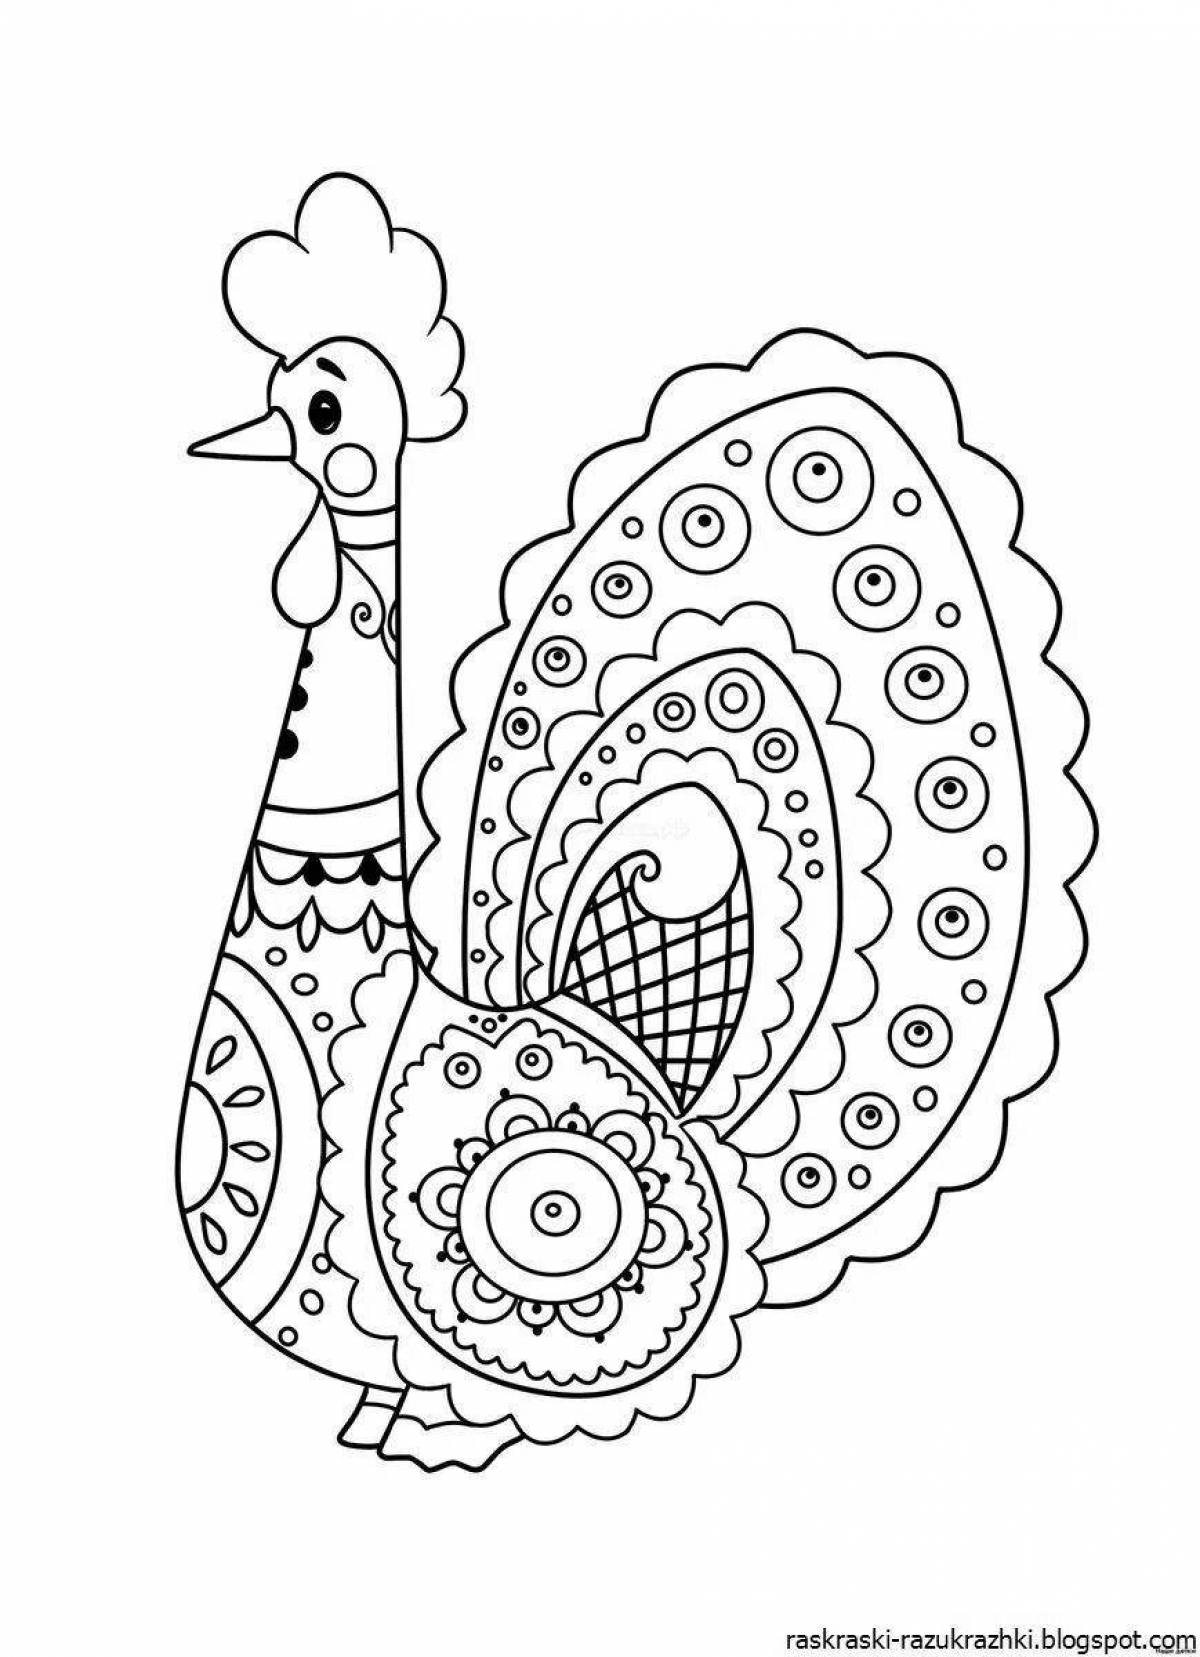 Dymkovo rooster coloring page for preschoolers